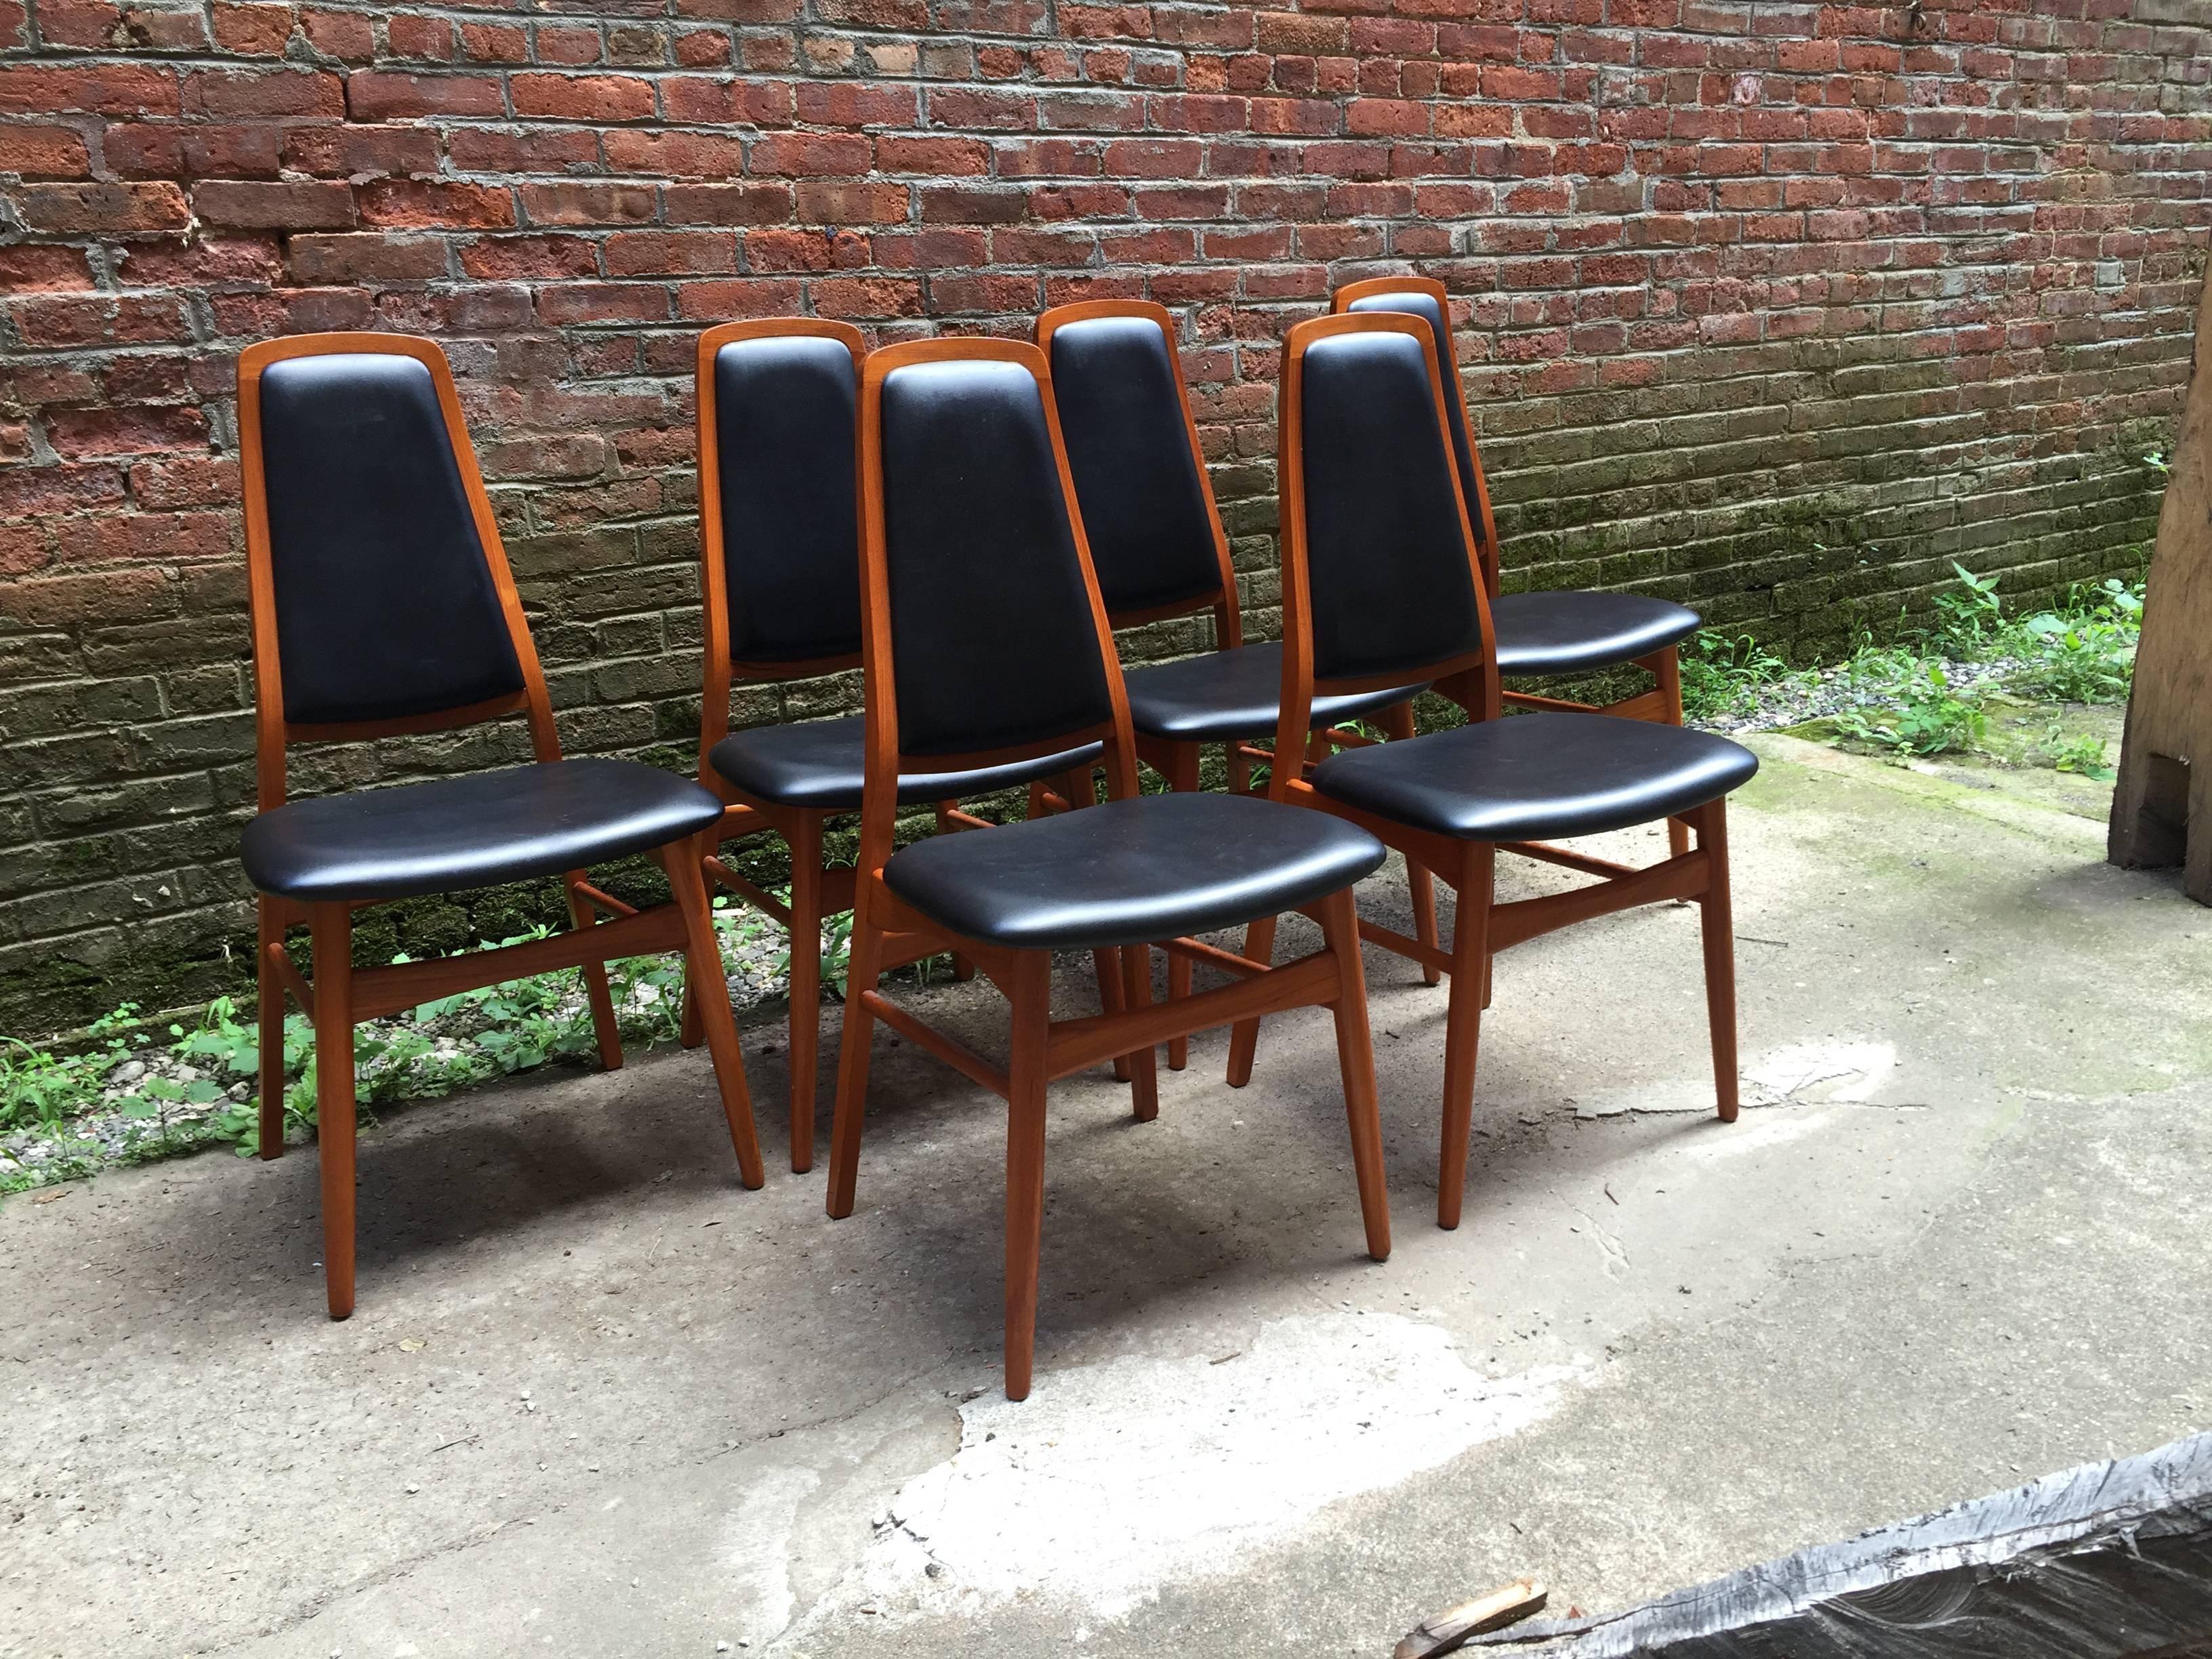 Set of six elegant Danish teak dining chairs. Teak frames and black vinyl upholstered seats and backs. Some are signed Art Furn, Made in Denmark, circa 1970. Super clean and sturdy.